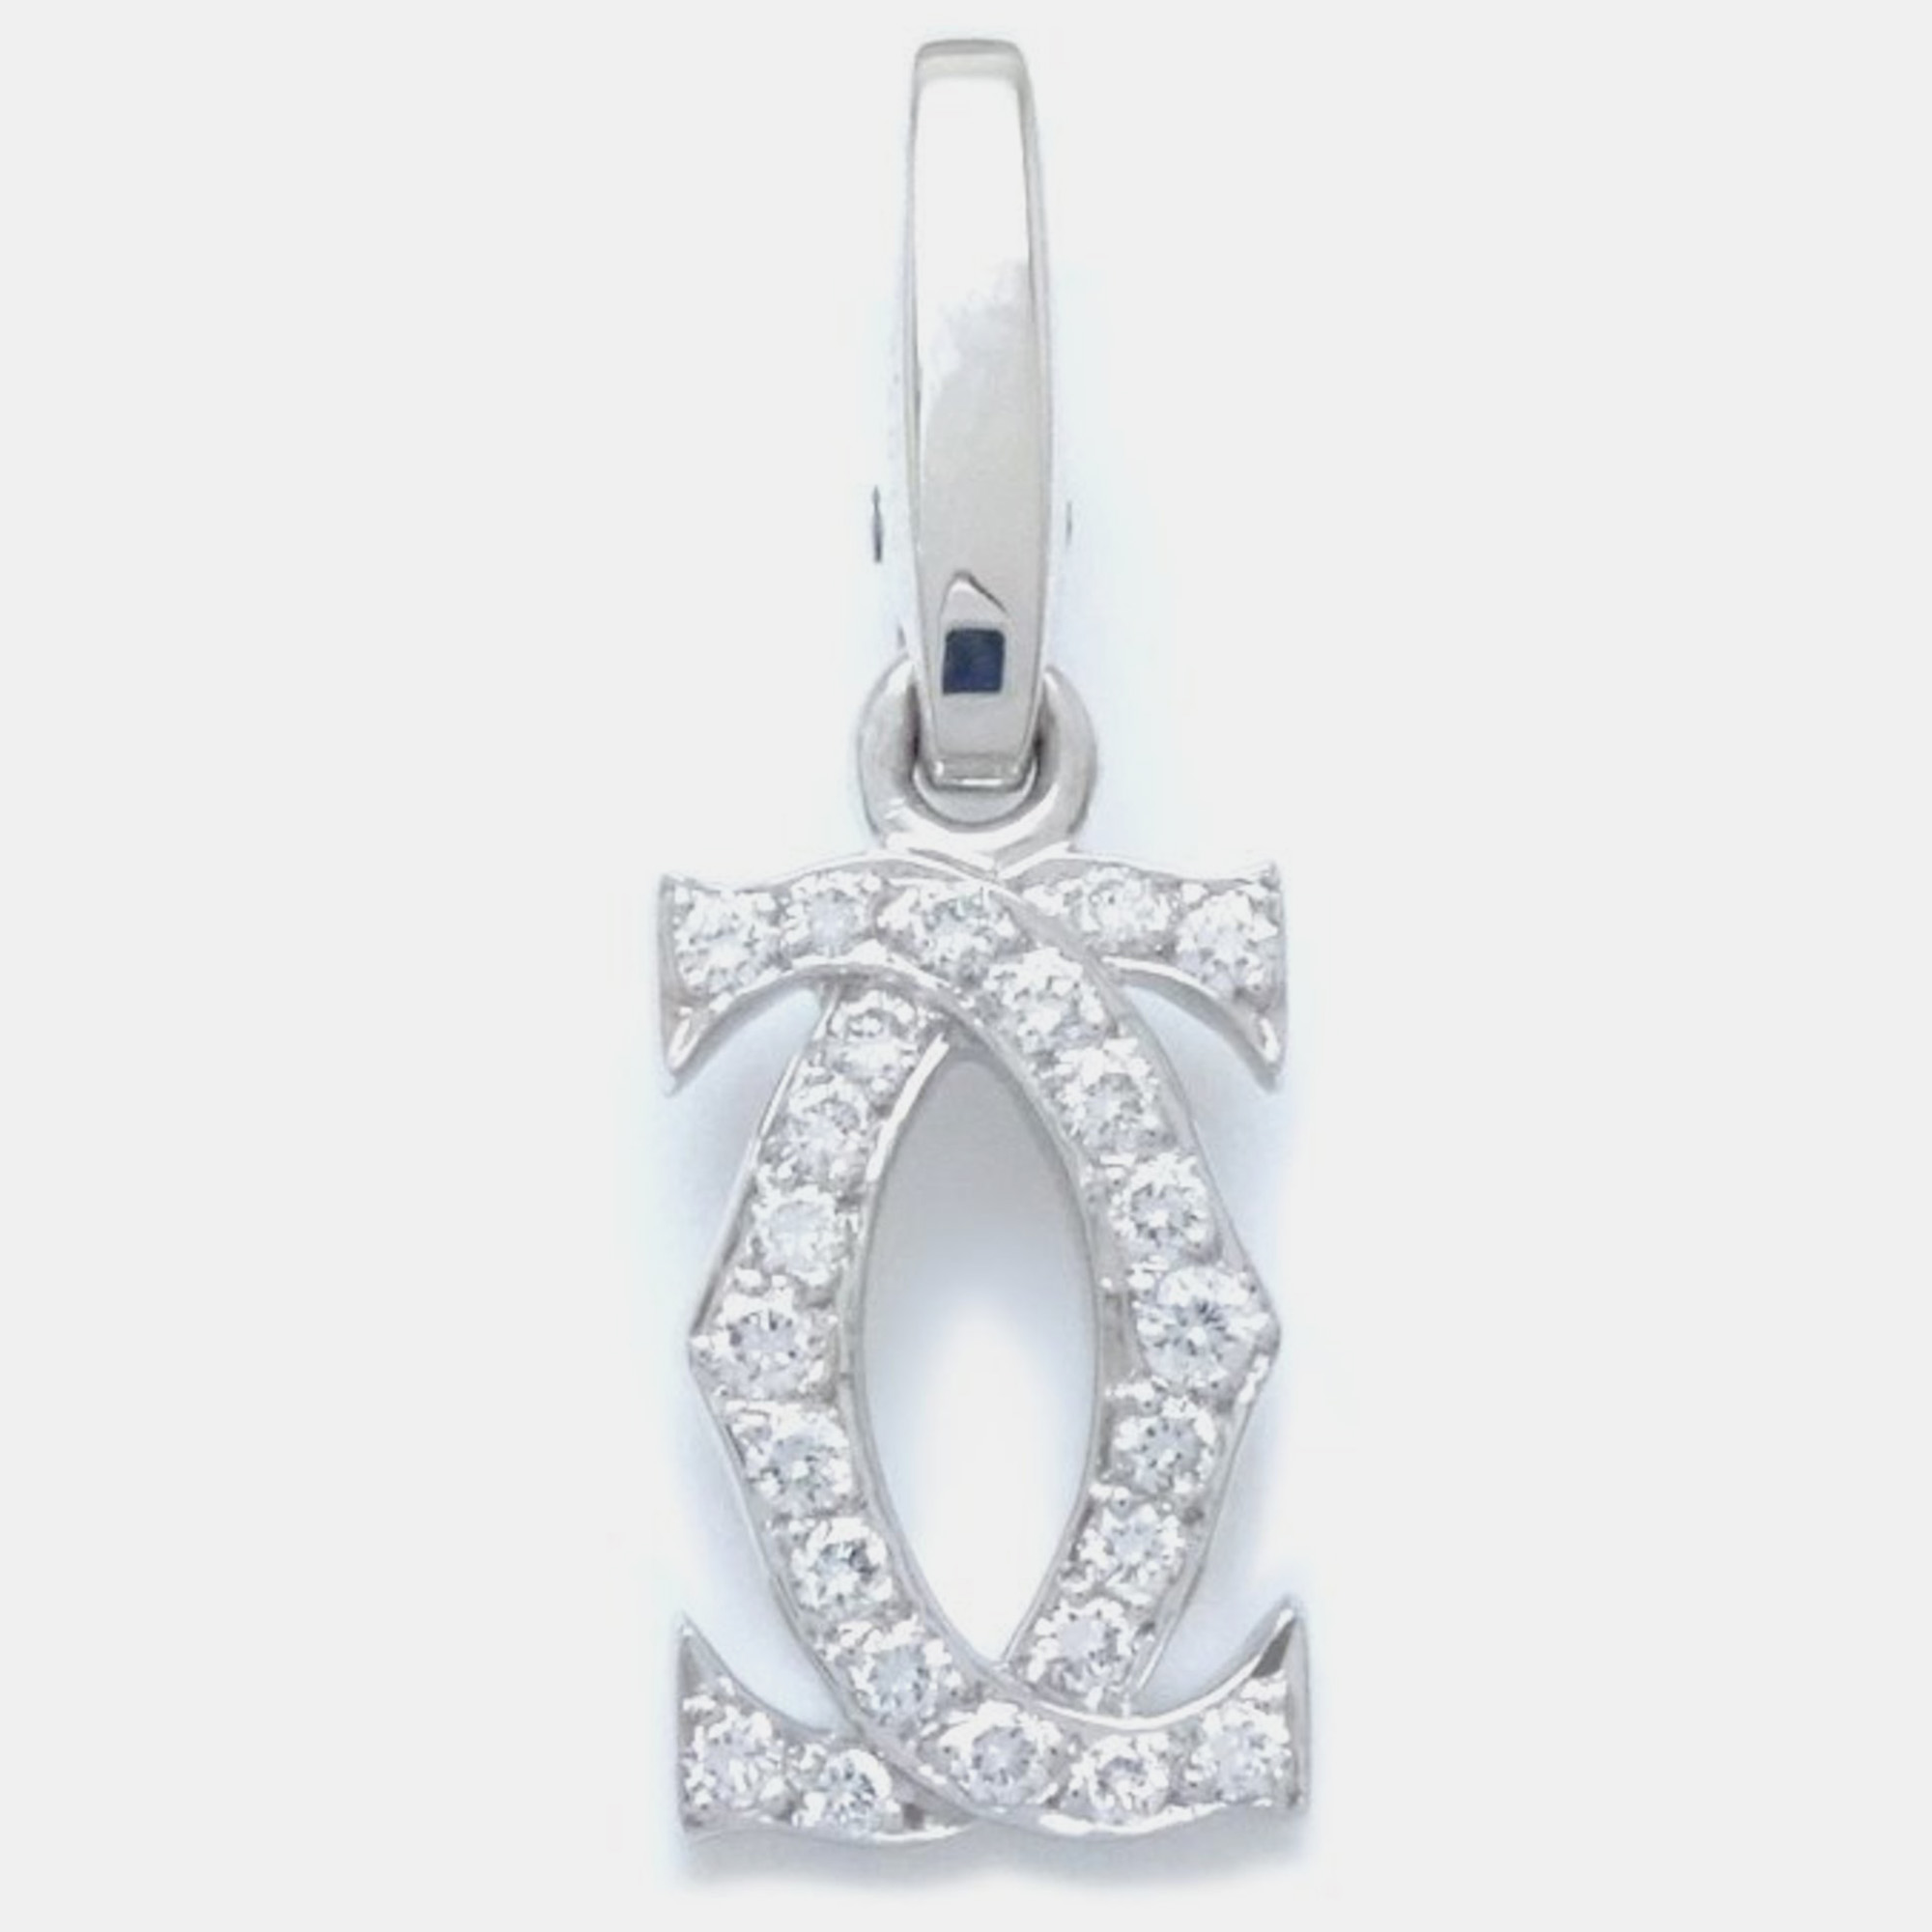 Cartier 18k white gold and diamond double c charm